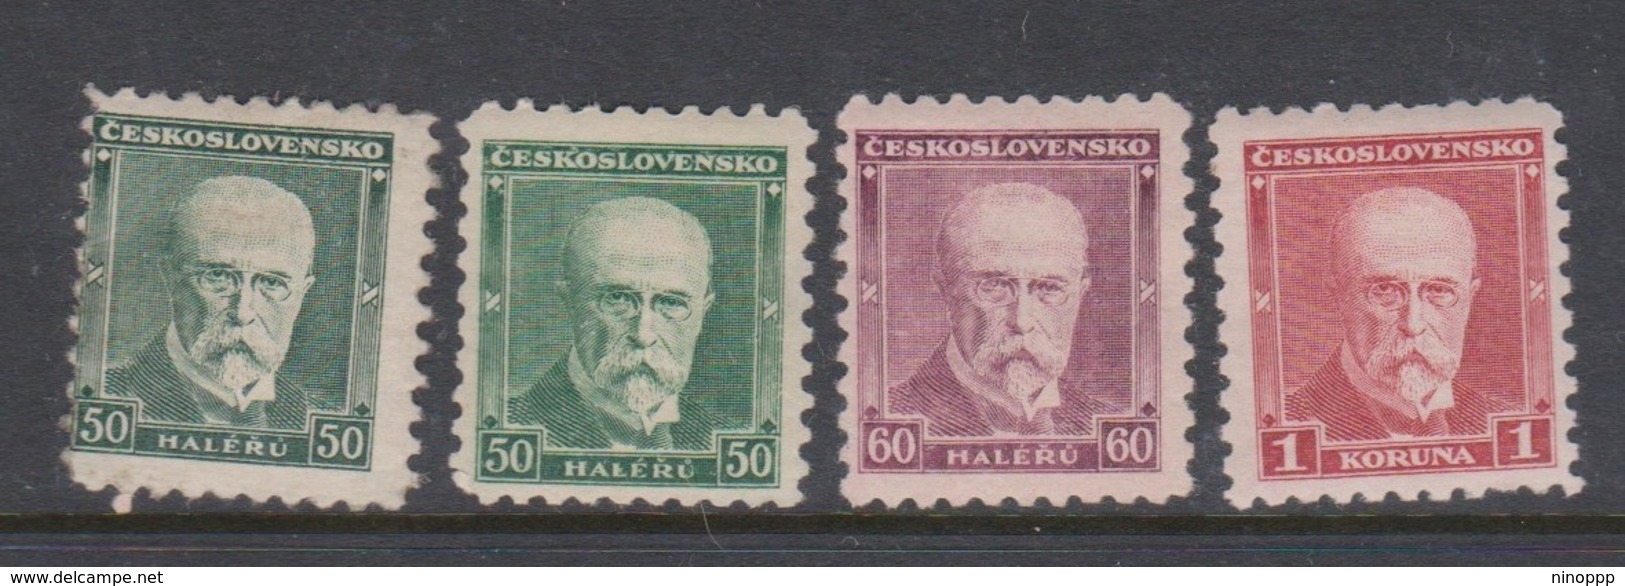 Czechoslovakia SG 302-304 1930 President Masaryk,mint Hinged - Used Stamps